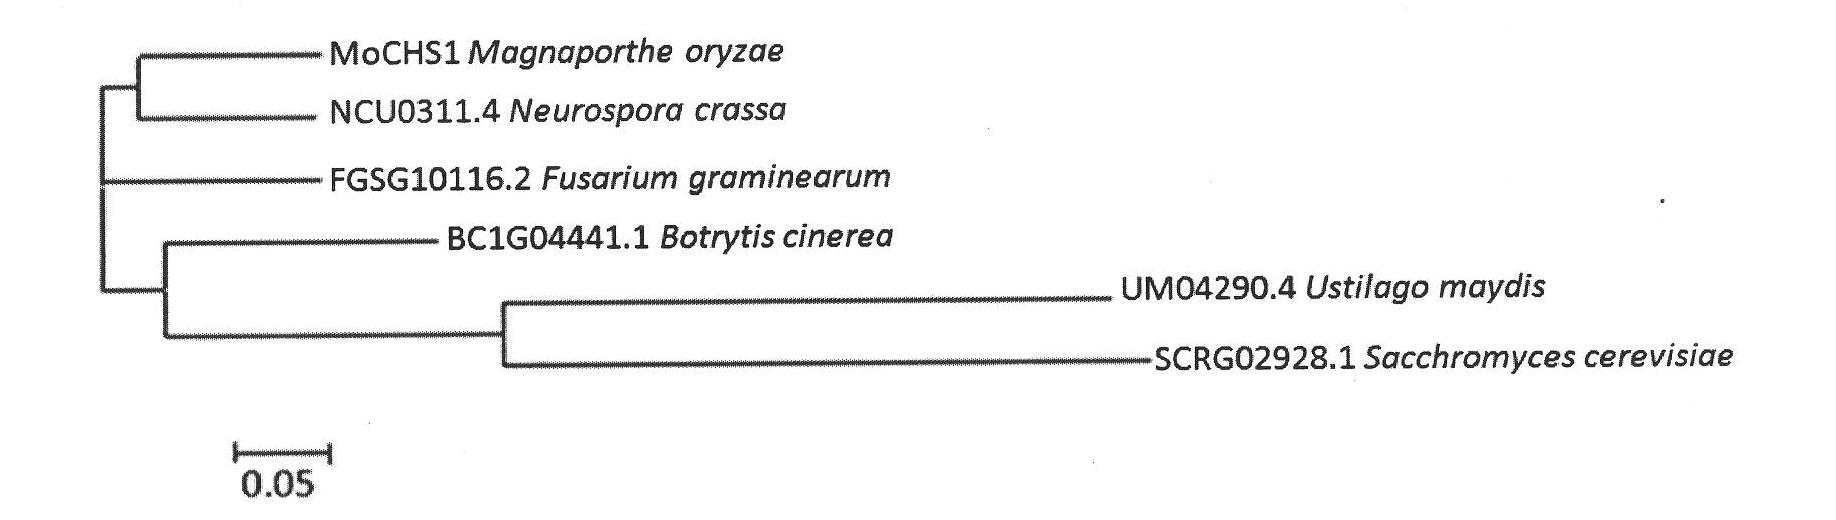 Function and usage of magnaporthe oryzae MoCHS1 gene and coded protein thereof